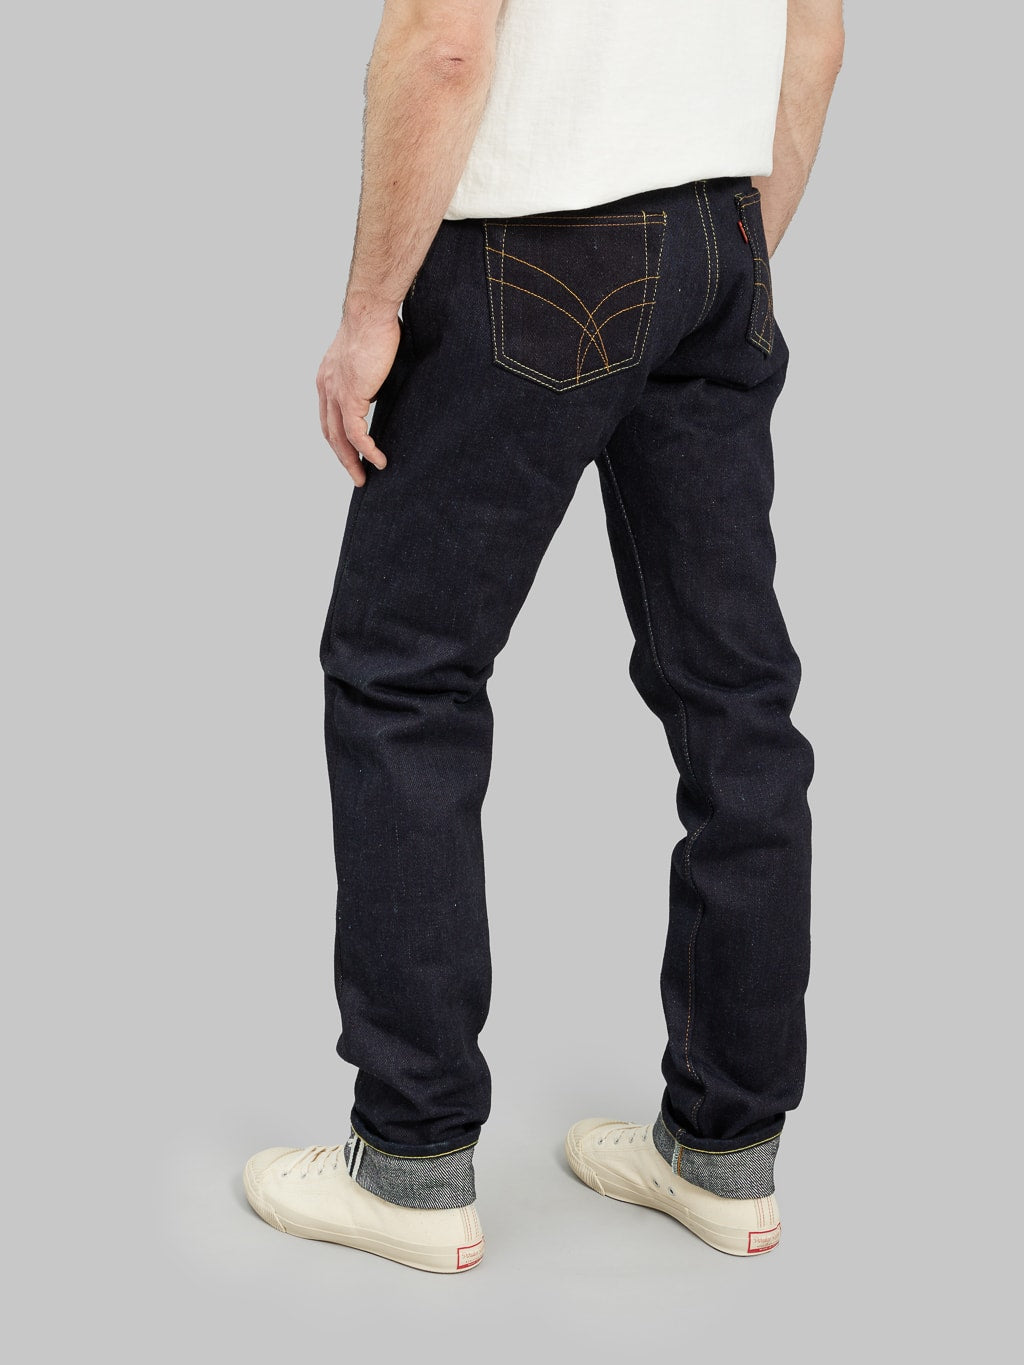 The Strike Gold Extra Heavyweight straight tapered jeans back fit